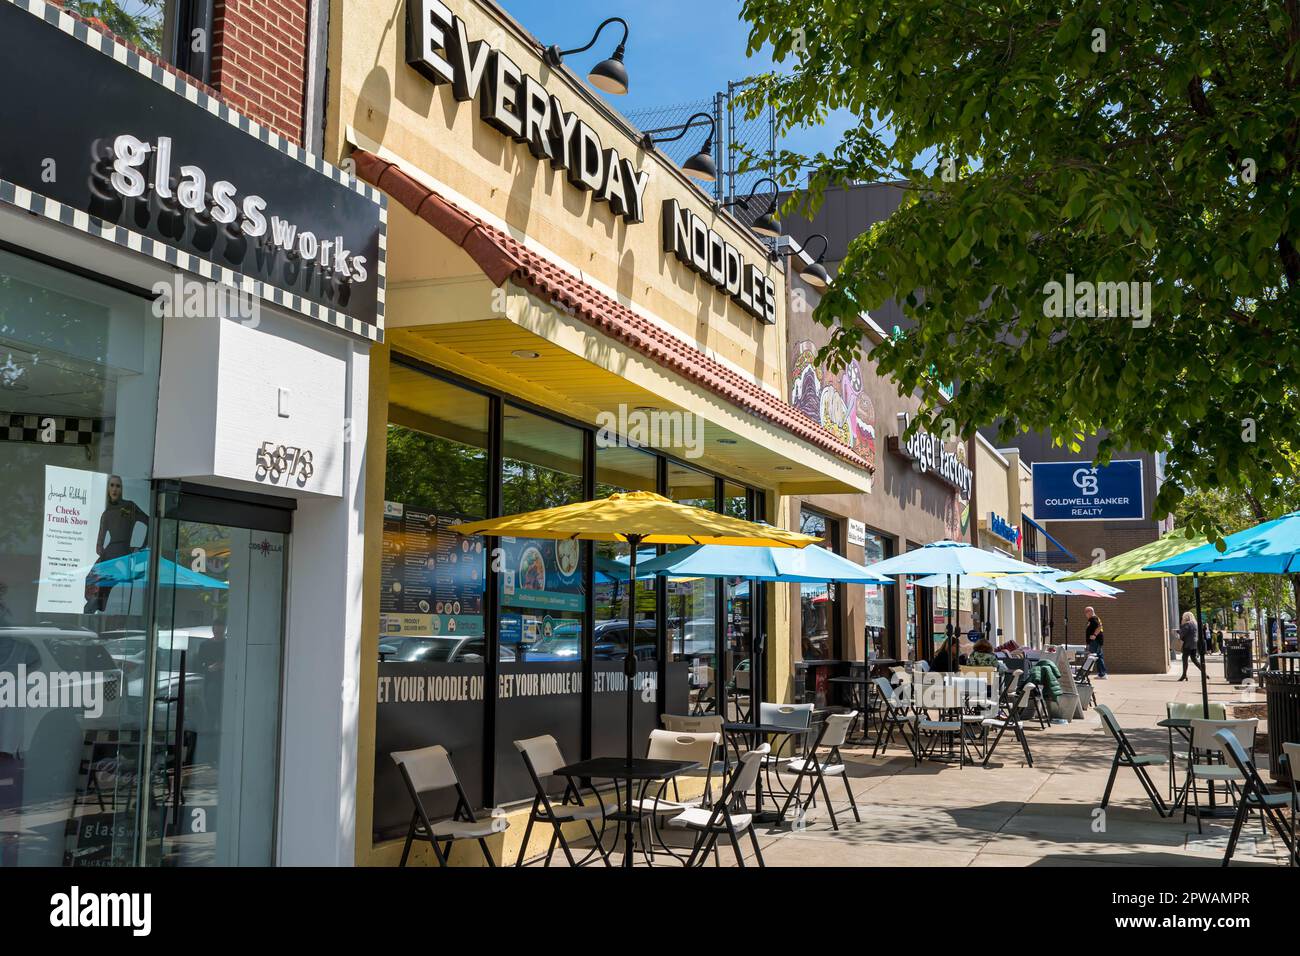 Restaurants and businesses along Forbes Avenue in the Squirrel Hill neighborhood in Pittsburgh, Pennsylvania, USA Stock Photo